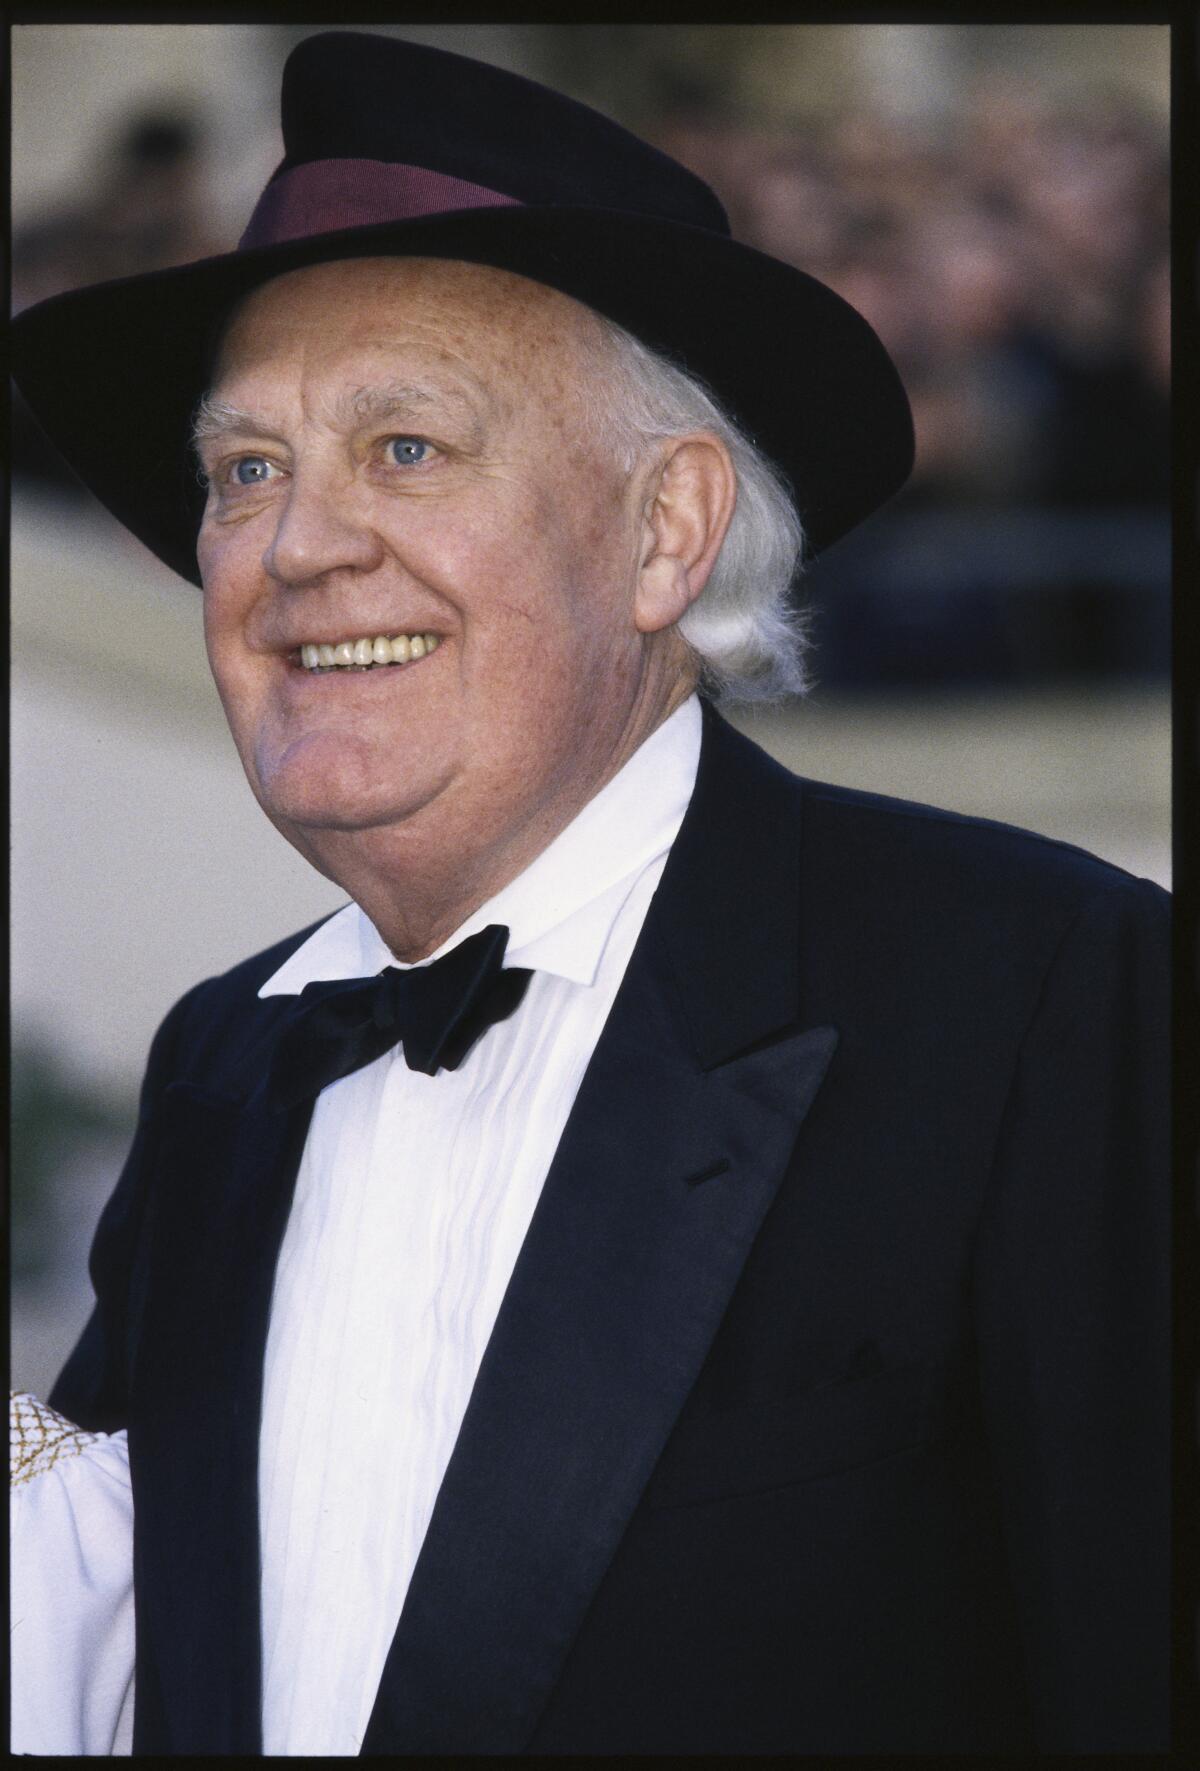 Joss Ackland wears a black tuxedo with a black top hat as he poses for pictures while on a red carpet.